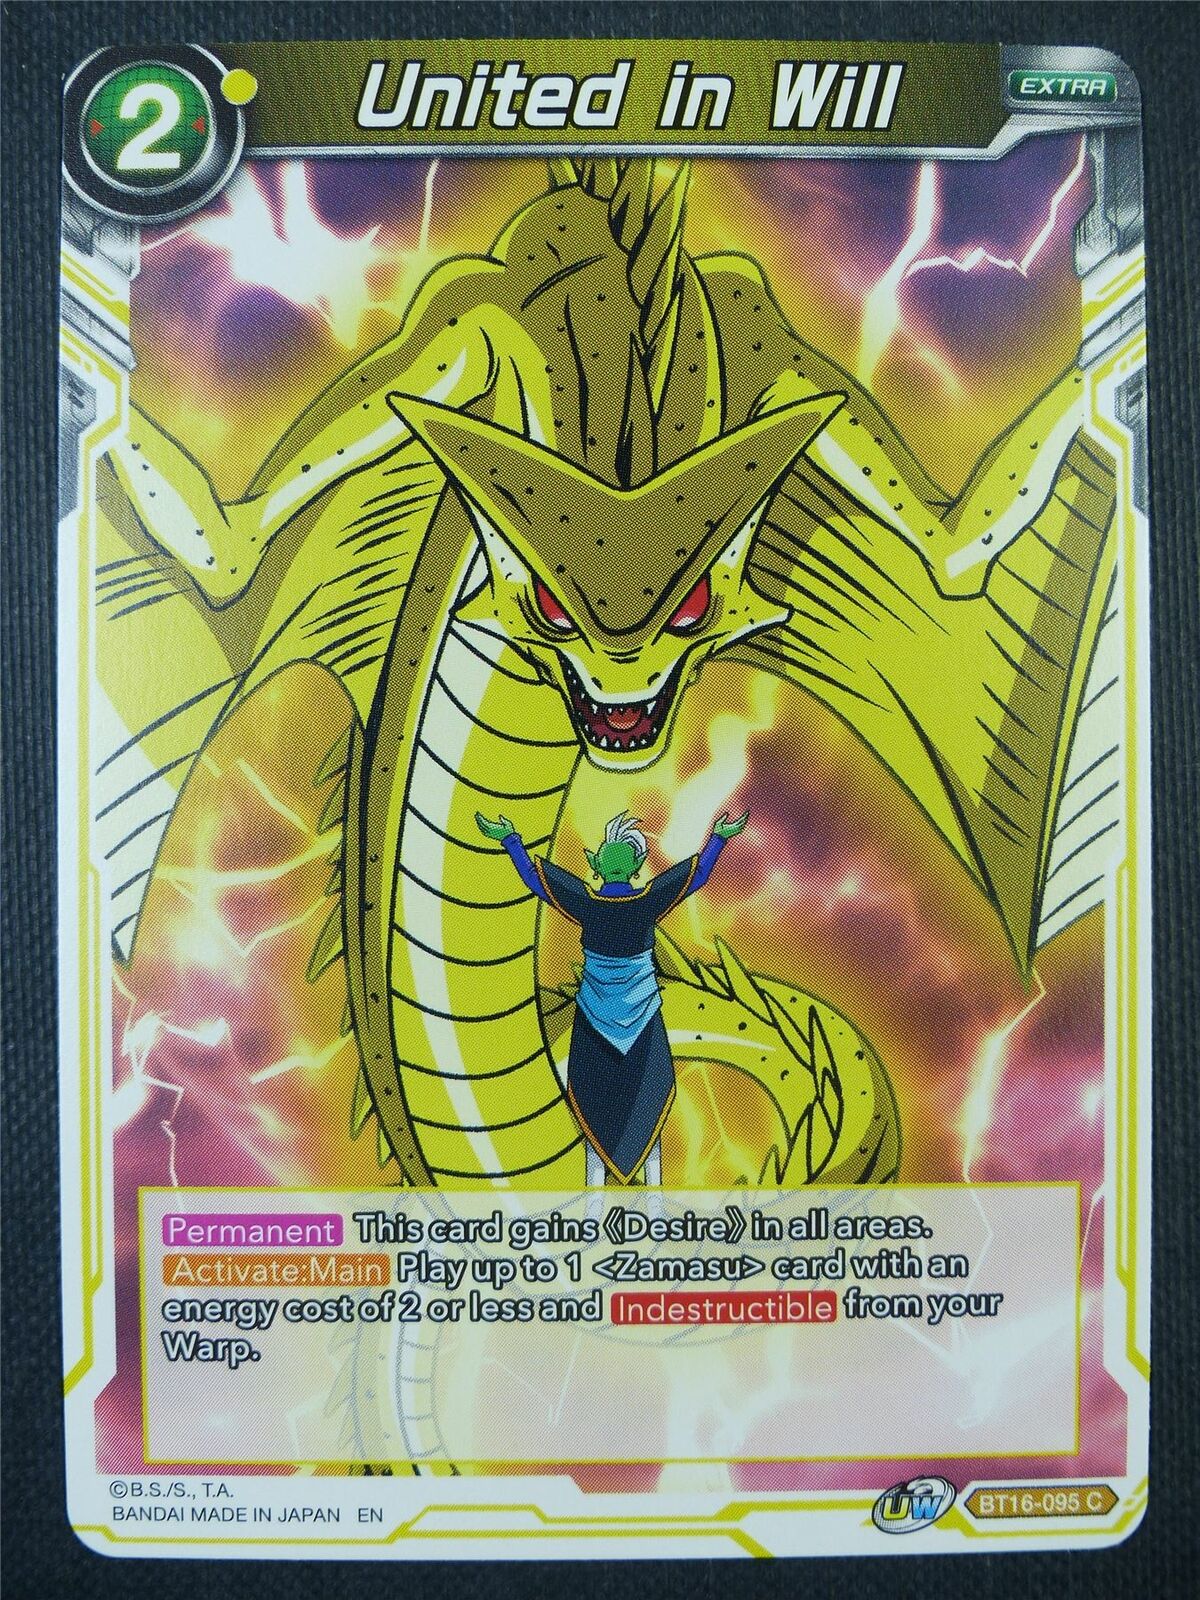 United in Will - Dragon Ball Super Card #7ZY